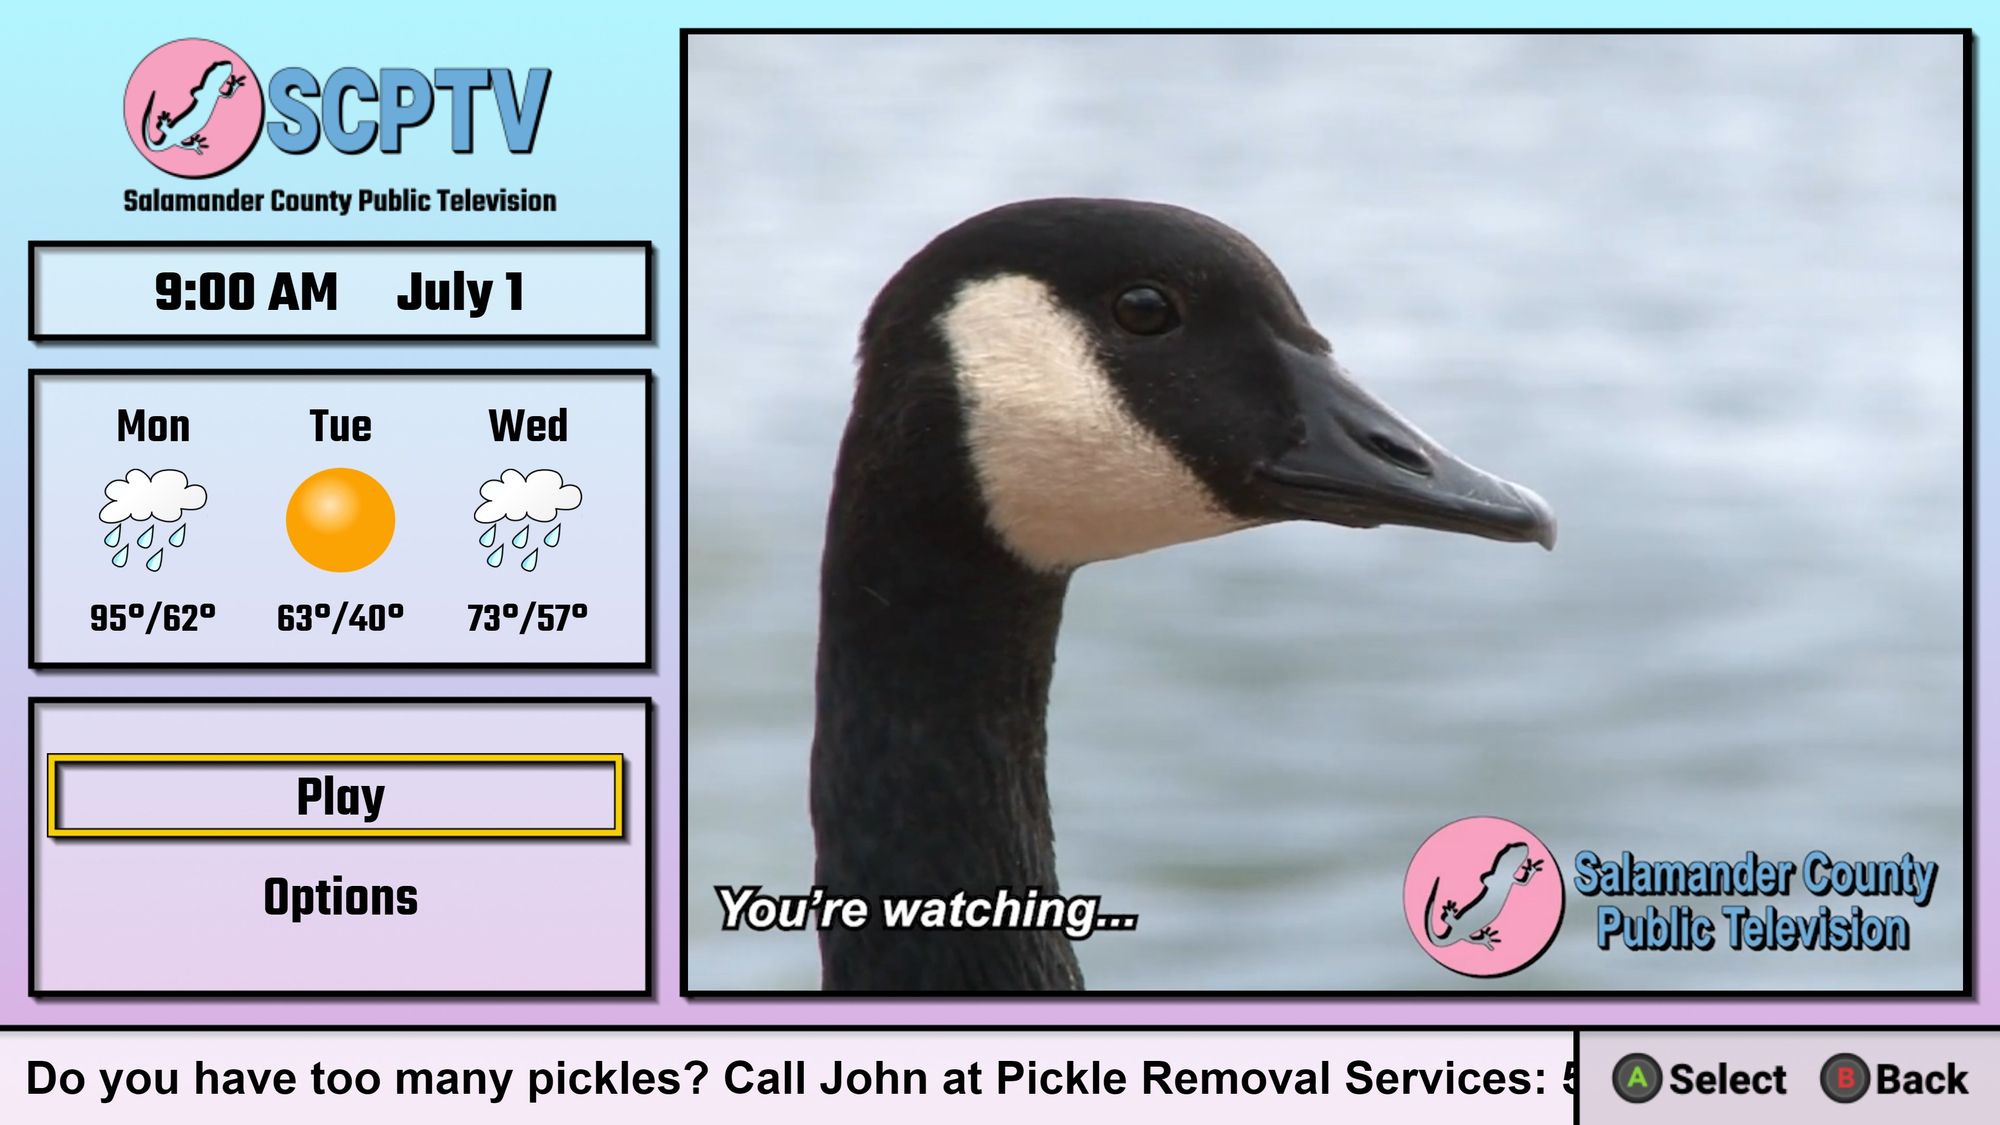 A weather screen for SCPTV depicting weather for 9am on July 1, with a goose in the main panel.